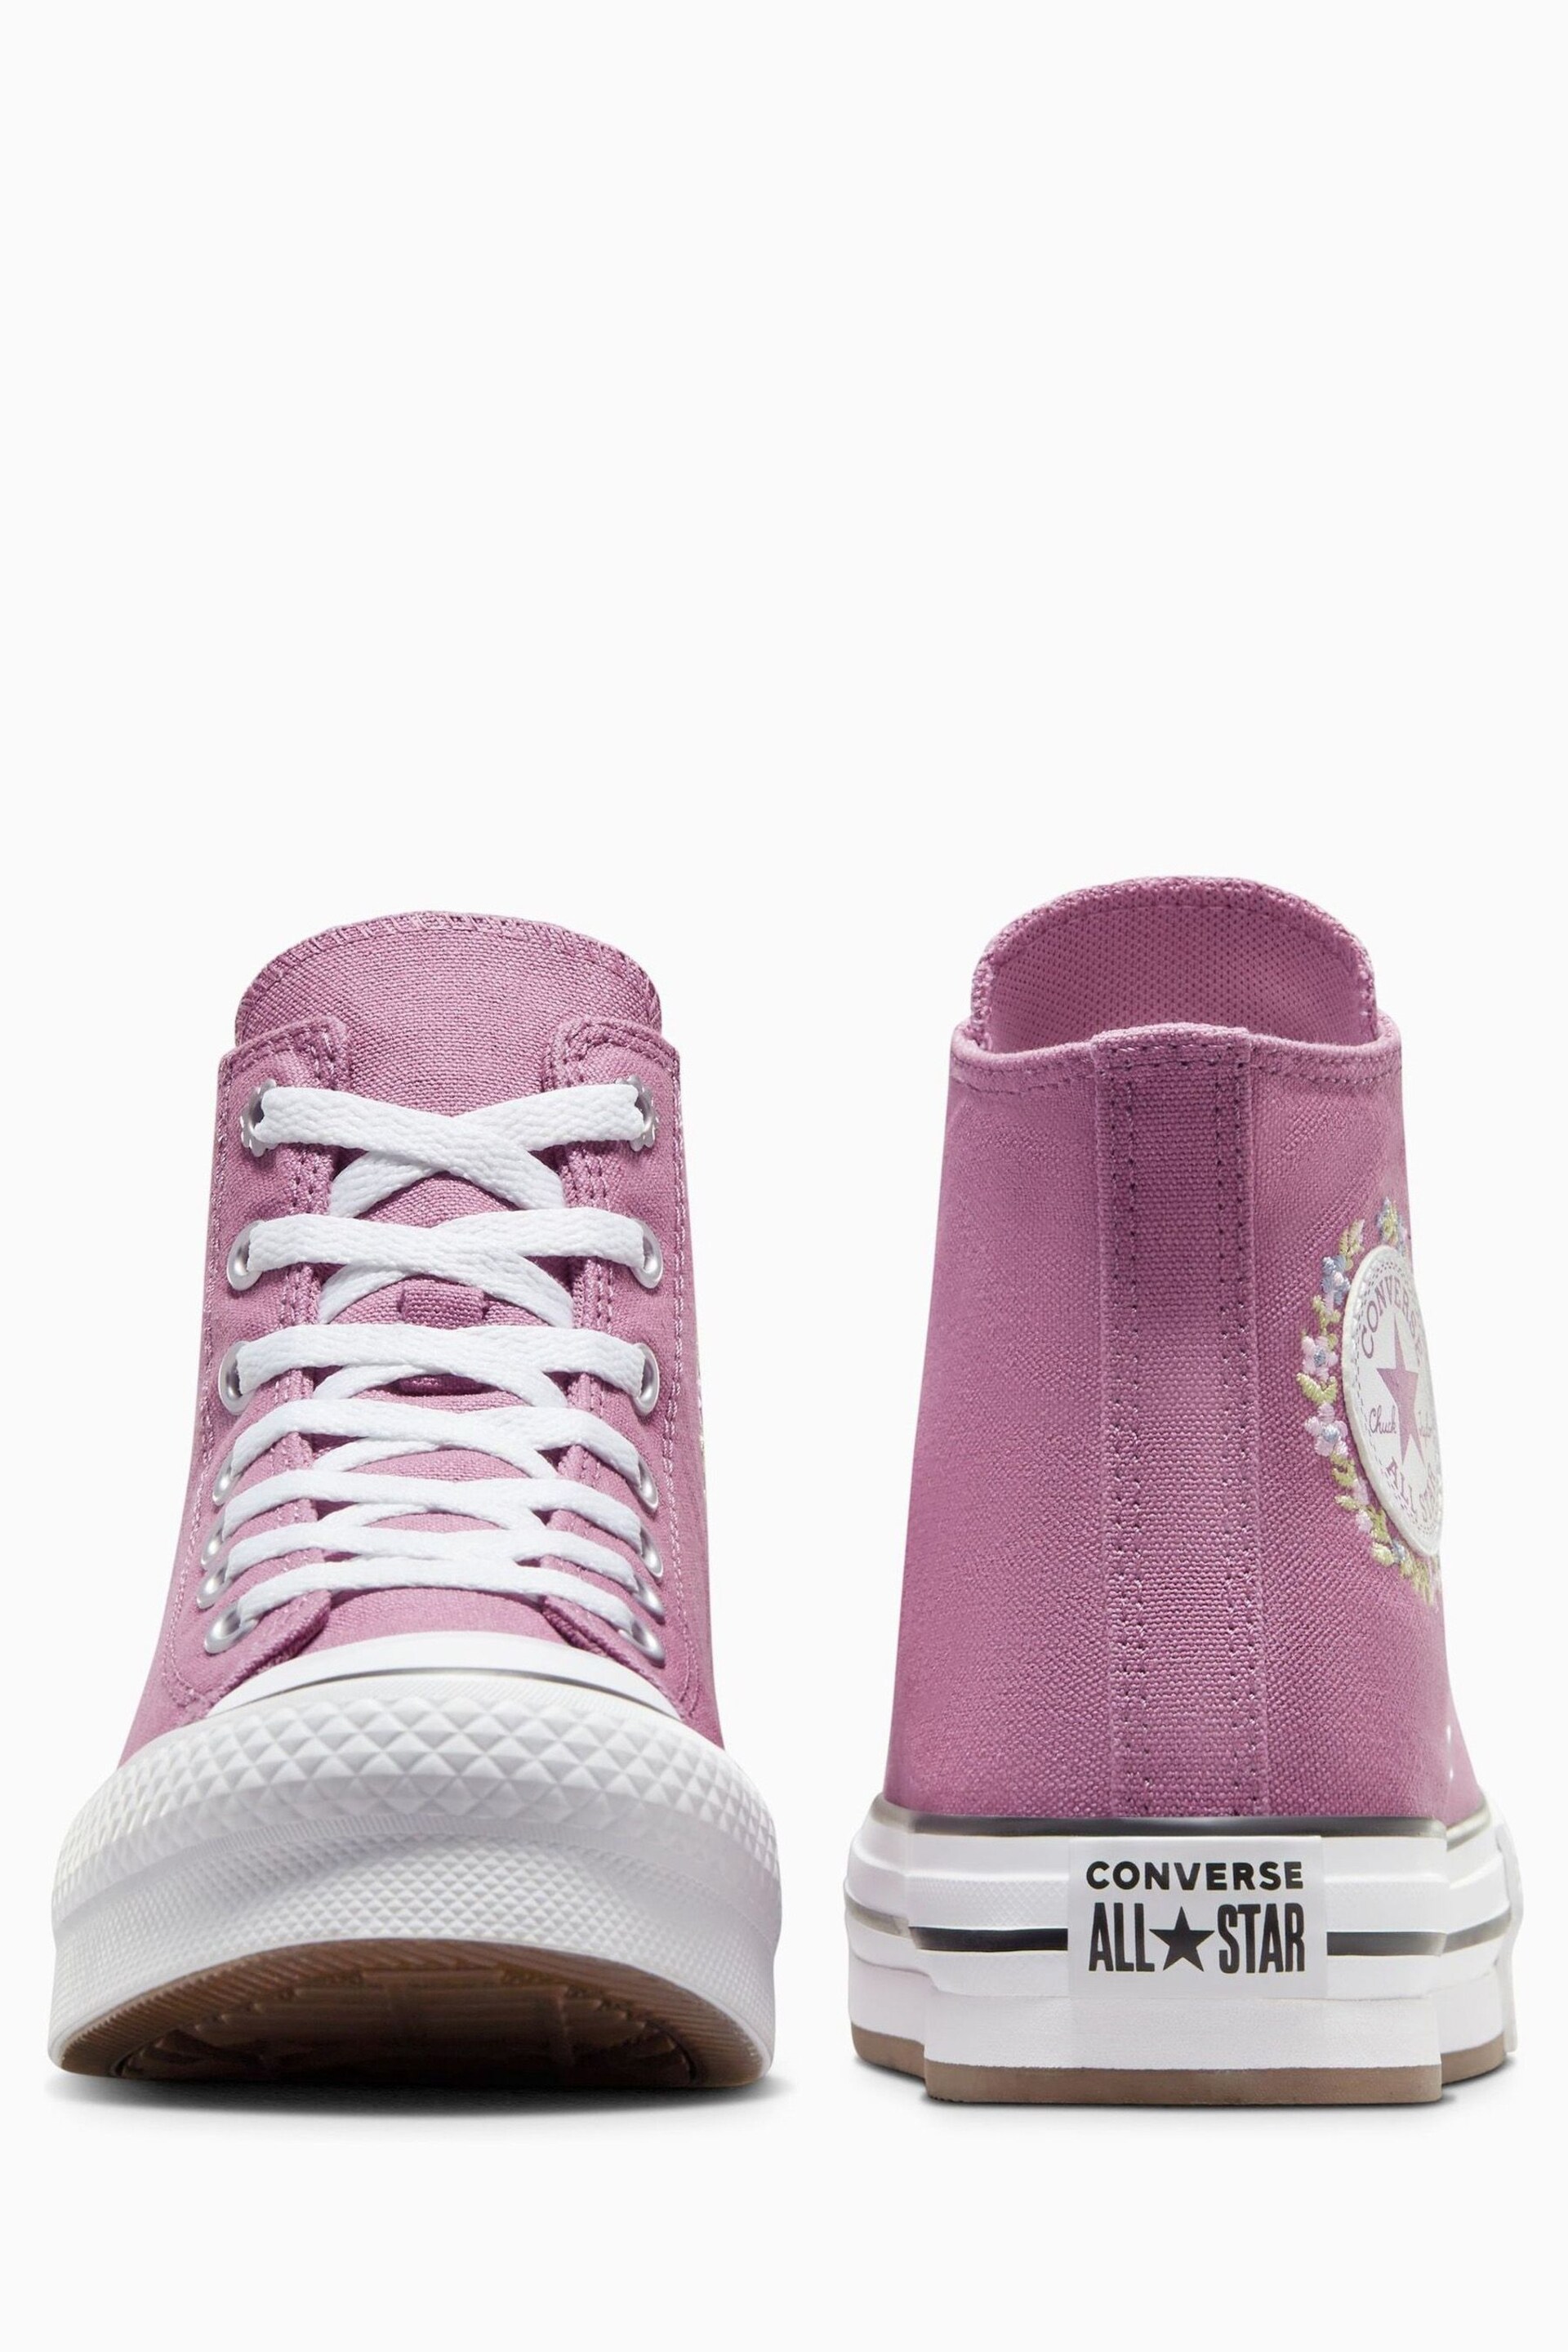 Converse Pink Youth Eva Lift Trainers - Image 6 of 10